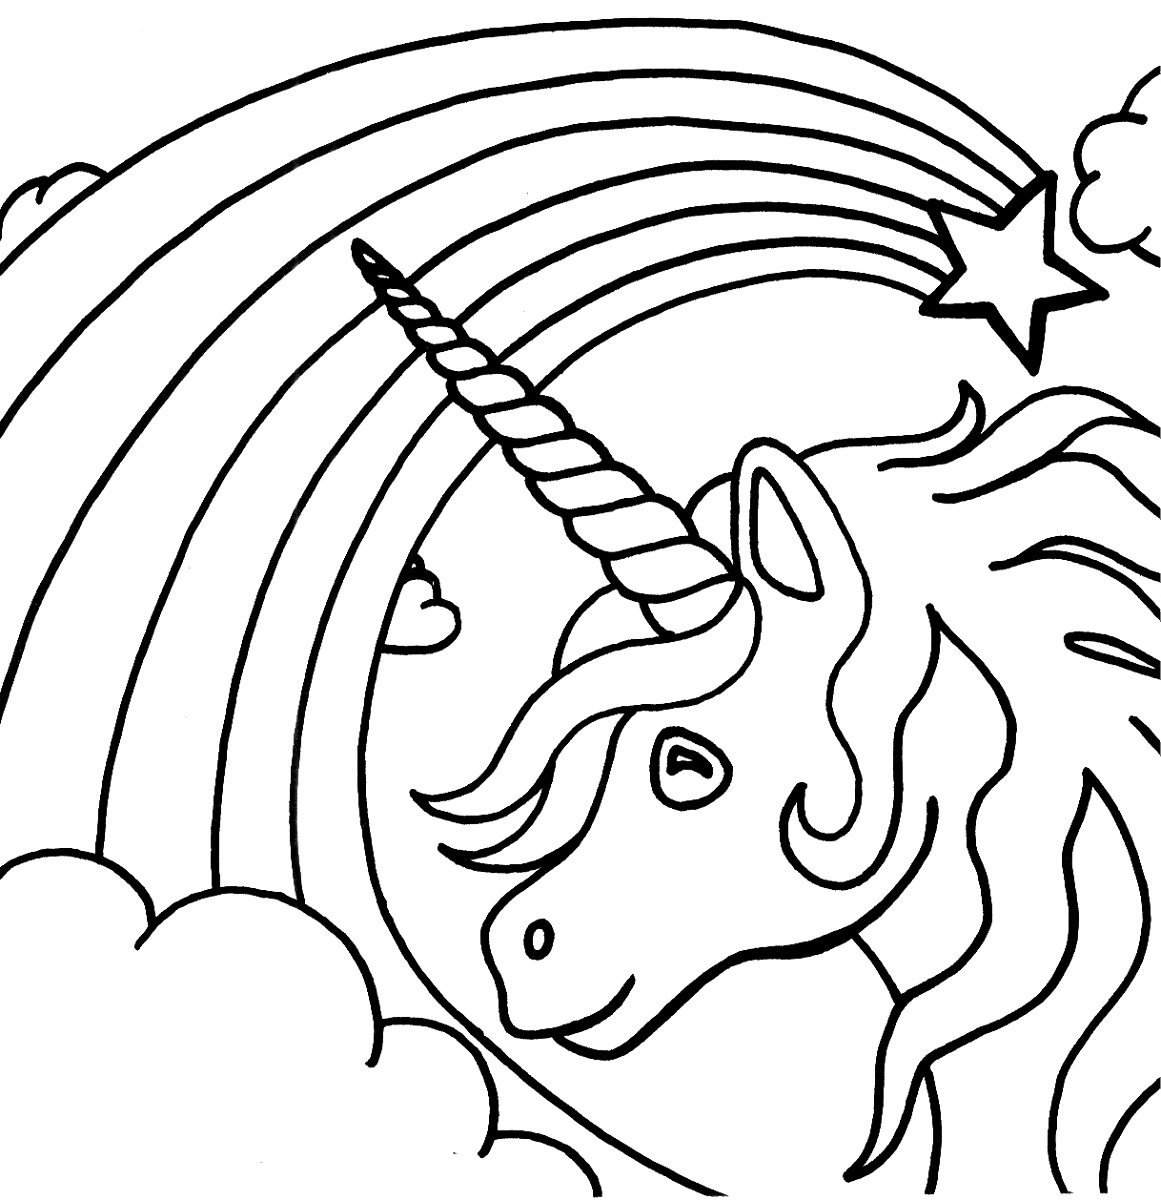 Unicorn Rainbow Coloring Pages at GetColorings.com | Free printable colorings pages to print and ...